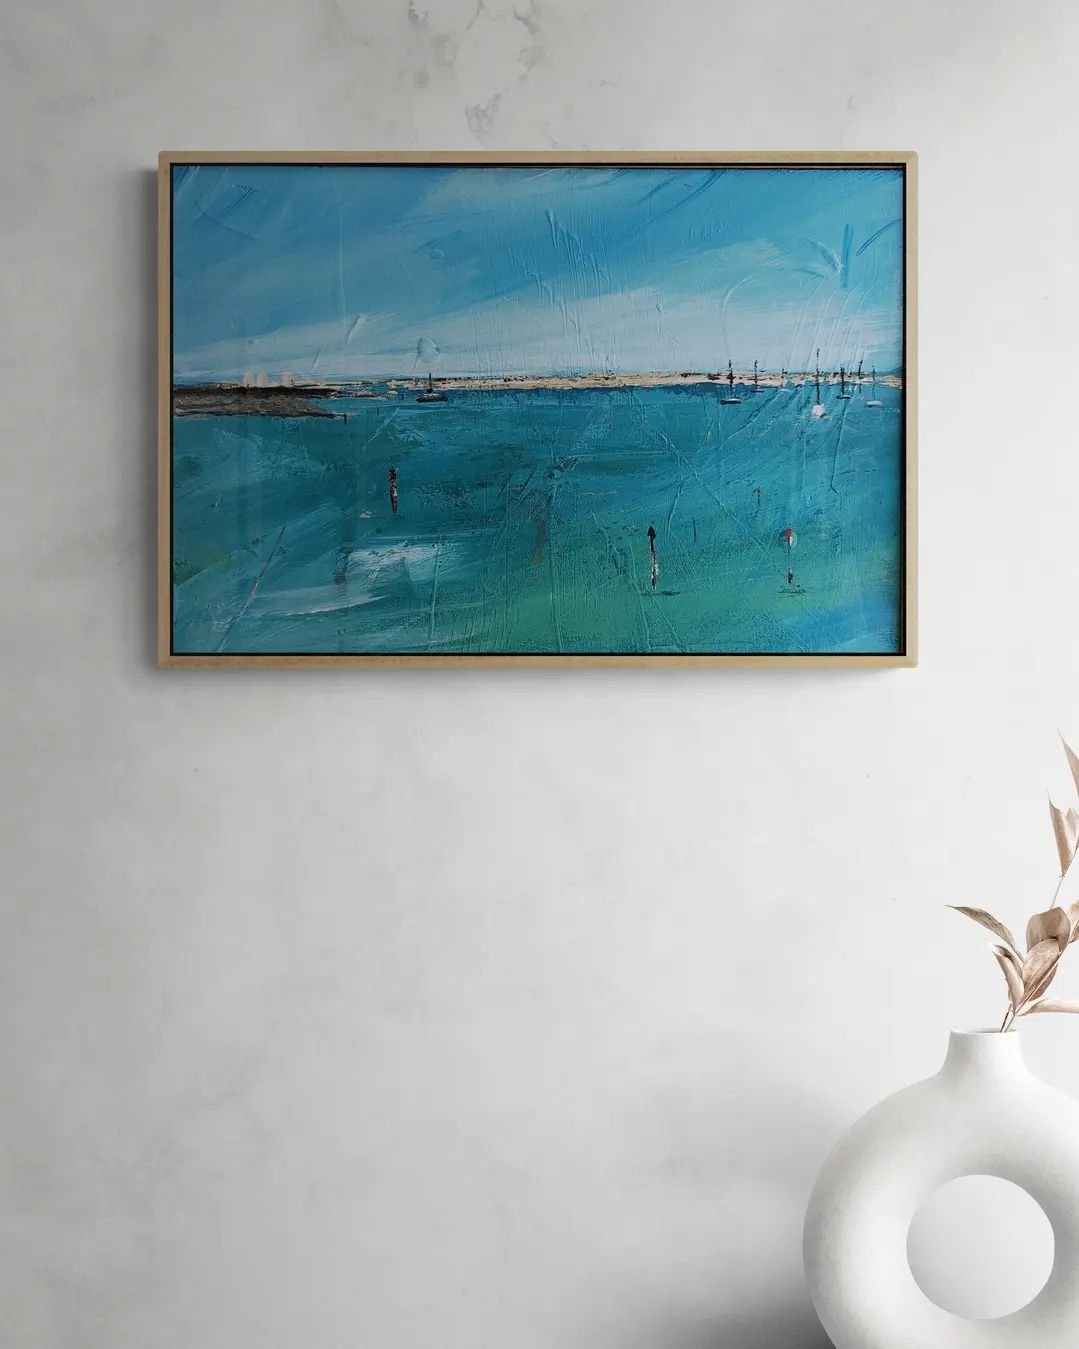 It is amazing how paintings come alive when they are framed. My in-house framer @manningwarob has just framed Koombana III in a  floating frame and it just pops! 
It is available for sale.  DM me or pop over to my website  www.diananeggoartist.com.
S